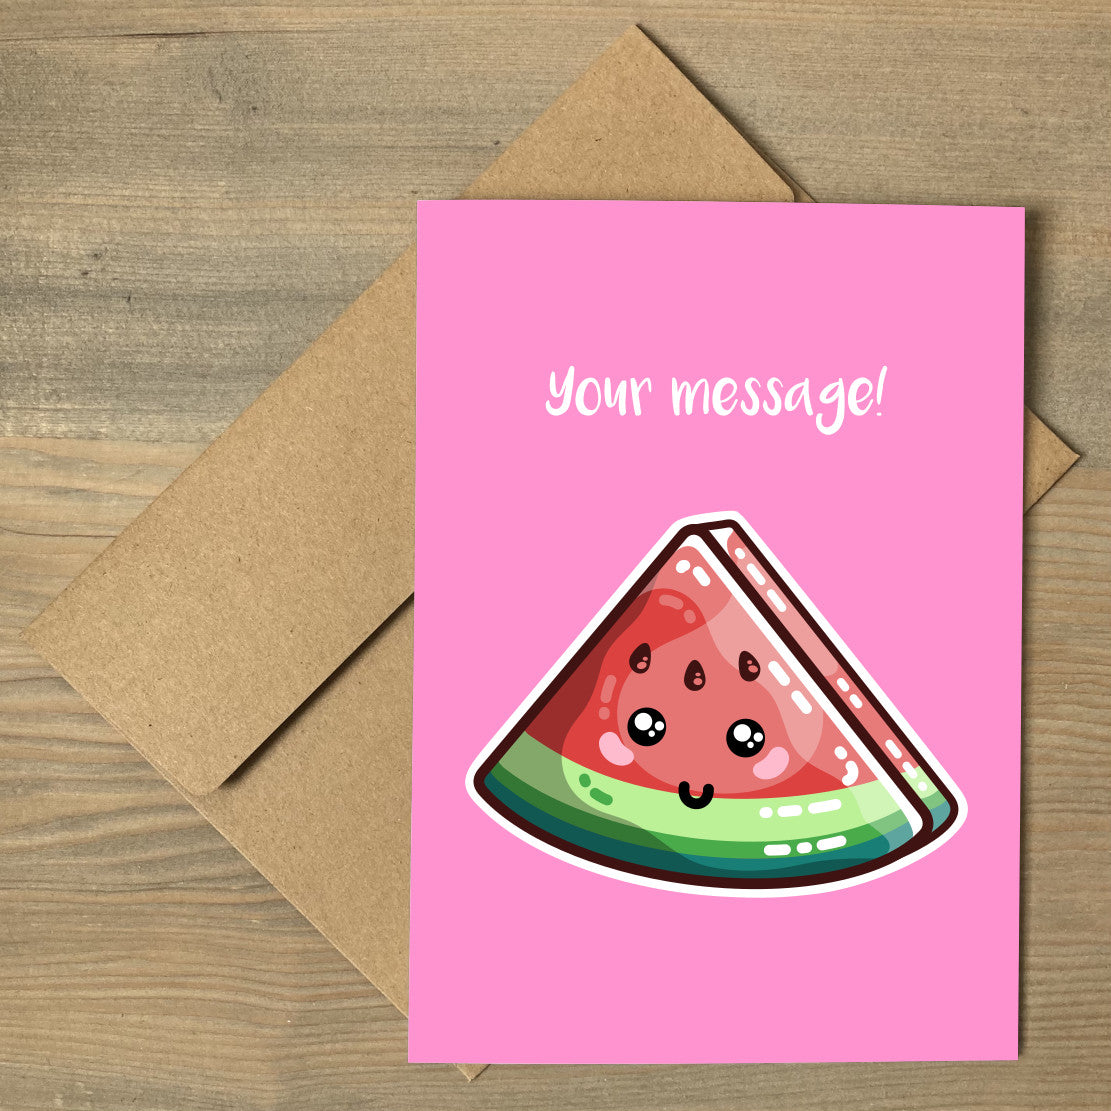 A pink greeting card lying flat on a brown envelope, with a design of a kawaii cute slice of watermelon and personalised with a message above